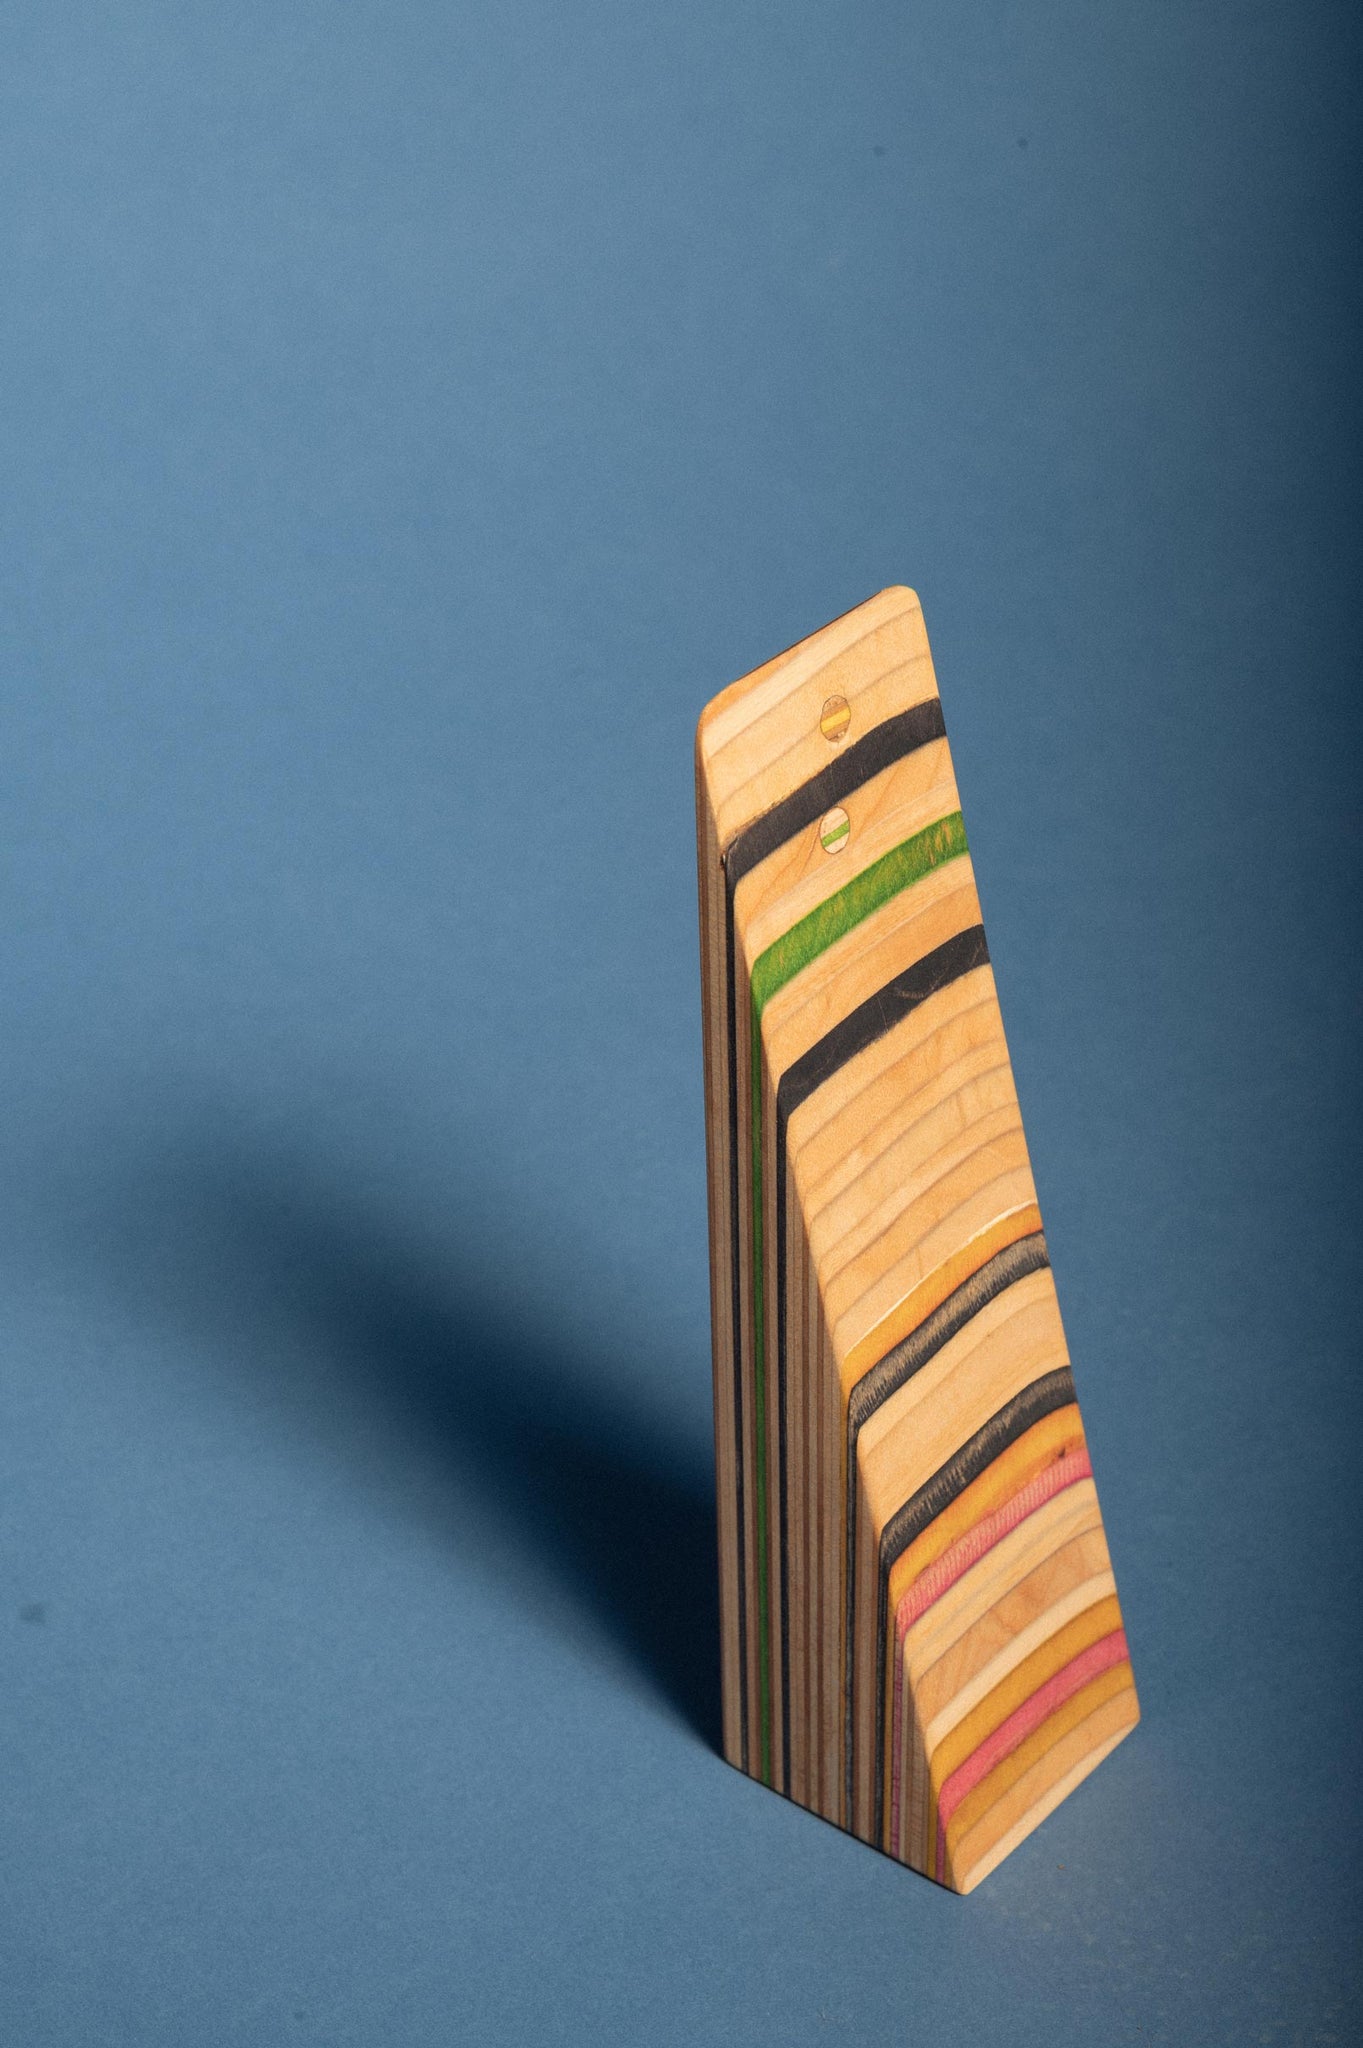 Door stop standing up on it's back face, showing the multicolored layers of recycled skateboard wood